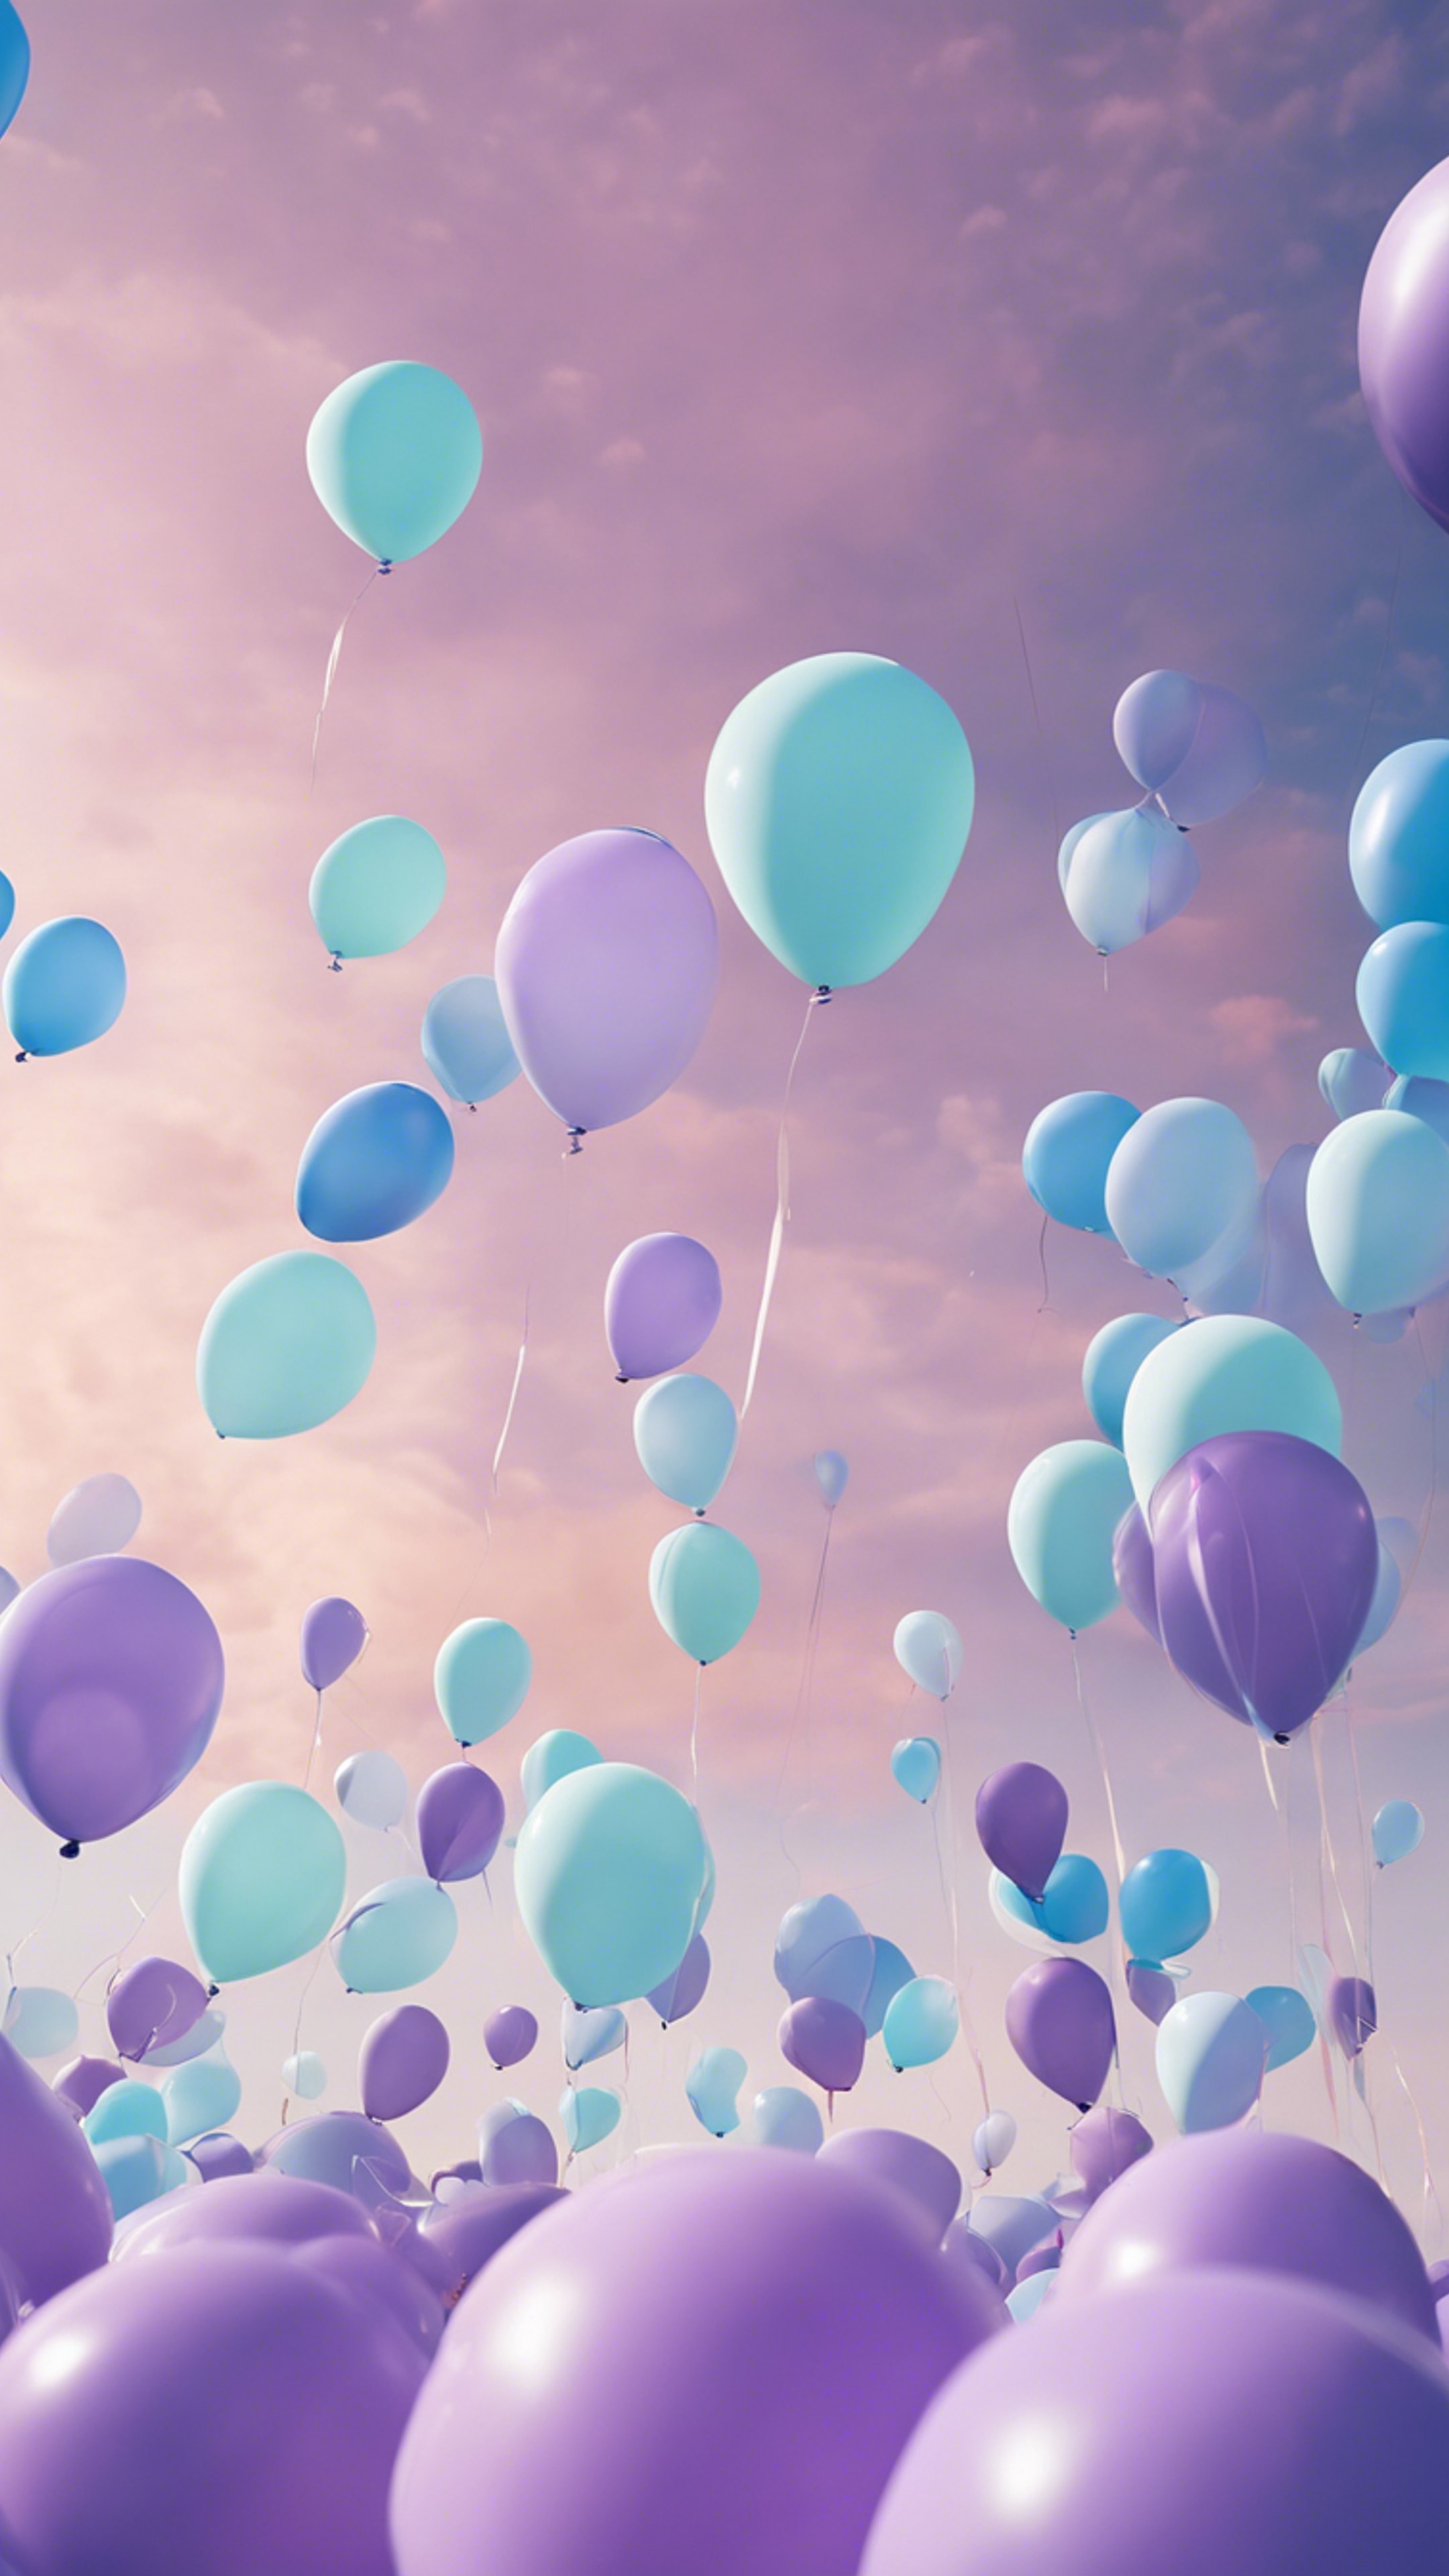 A whimsical scene of pastel purple and blue balloons filling the summer sky. ورق الجدران[fd1f8f768f0047c48fb6]